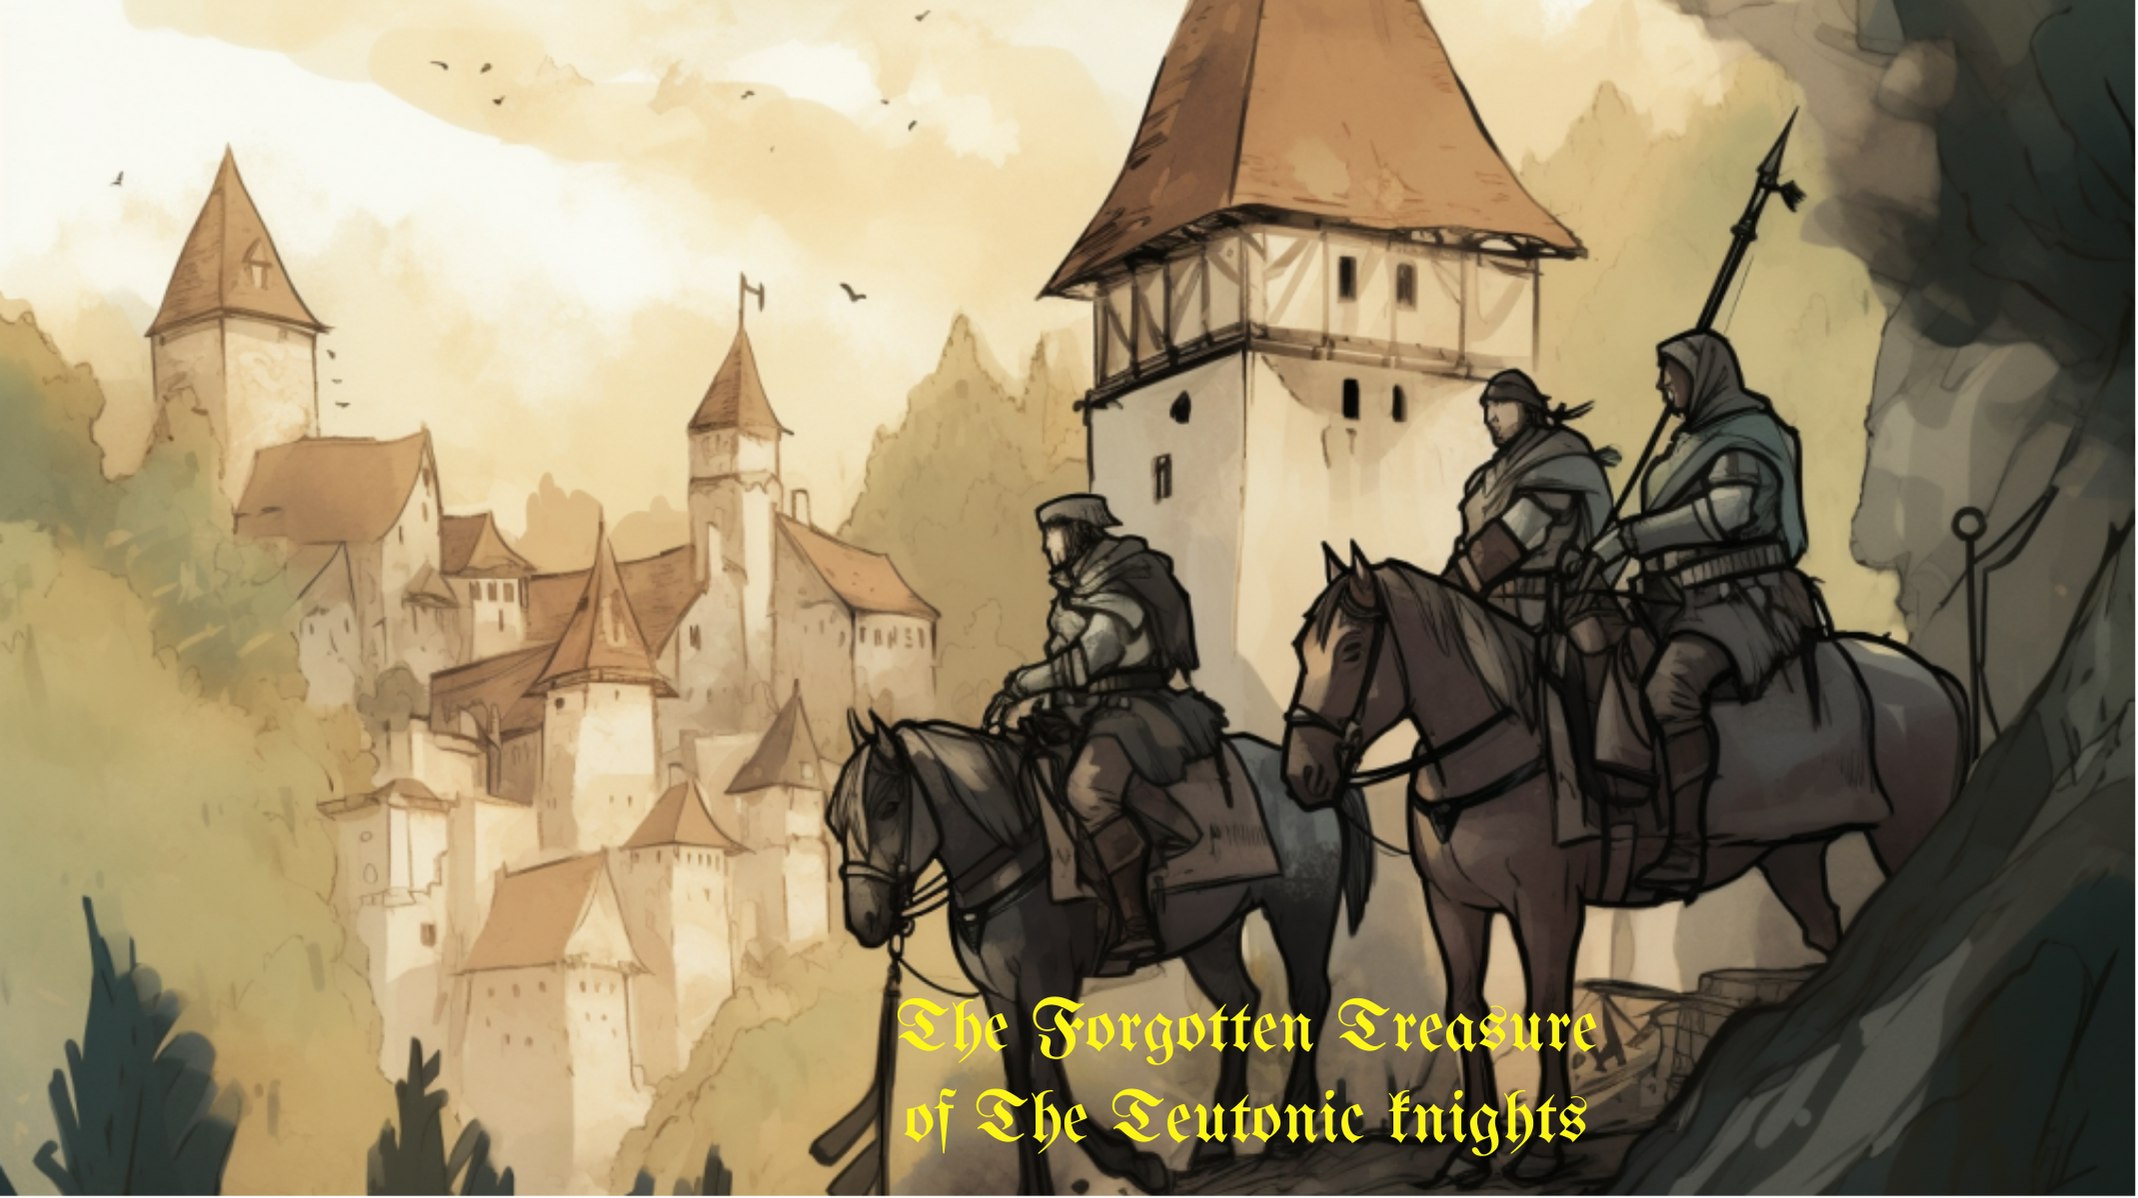 The Forgotten Treasure Of The Teutonic Knights, Brasov